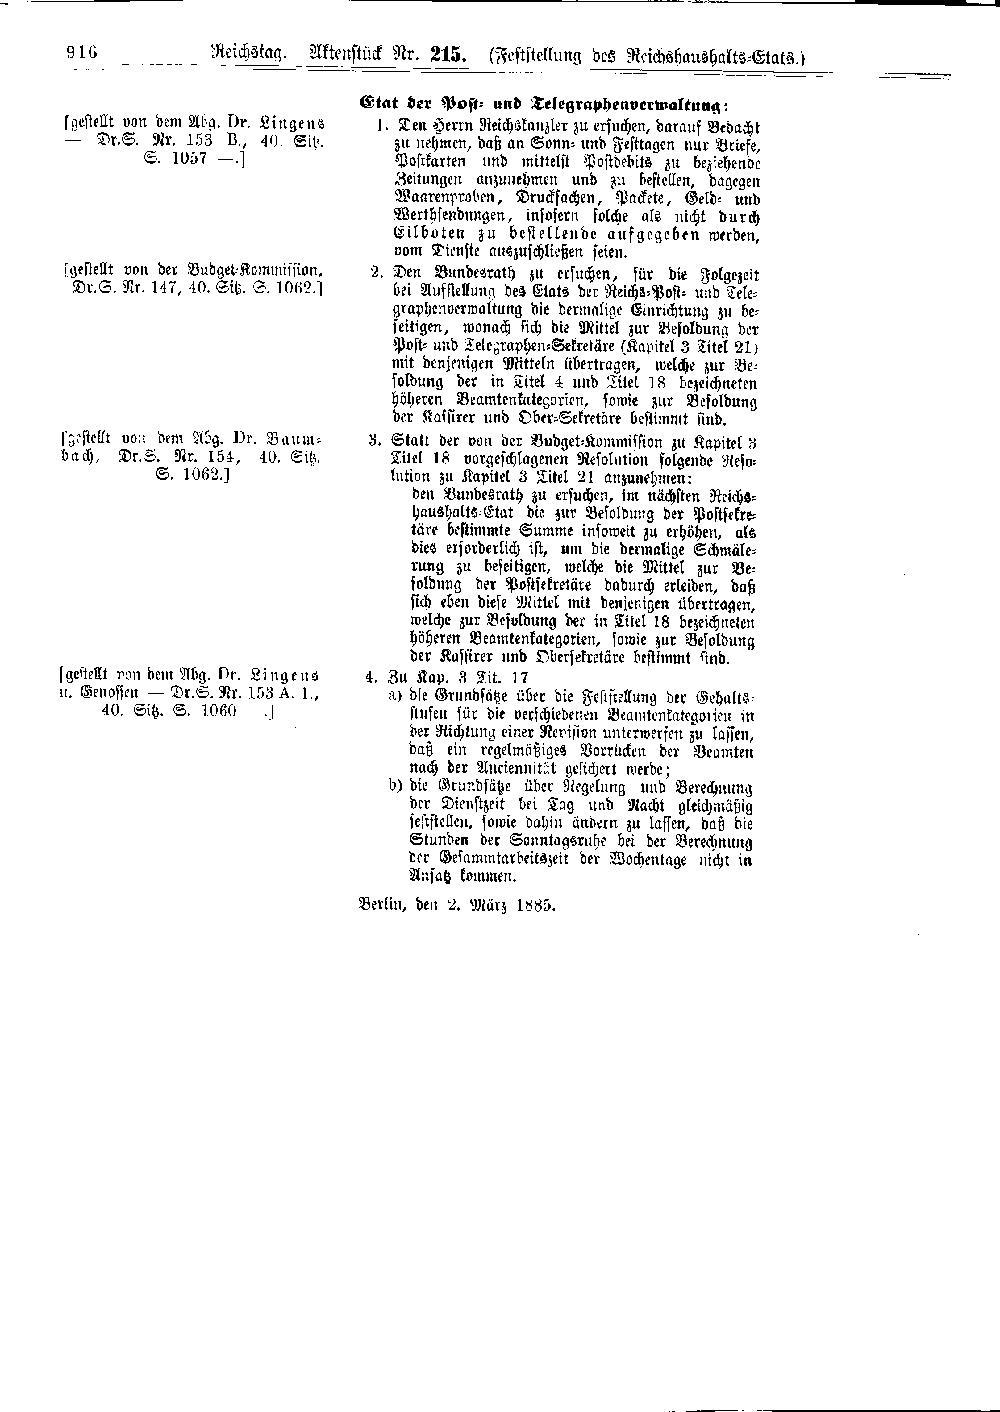 Scan of page 916